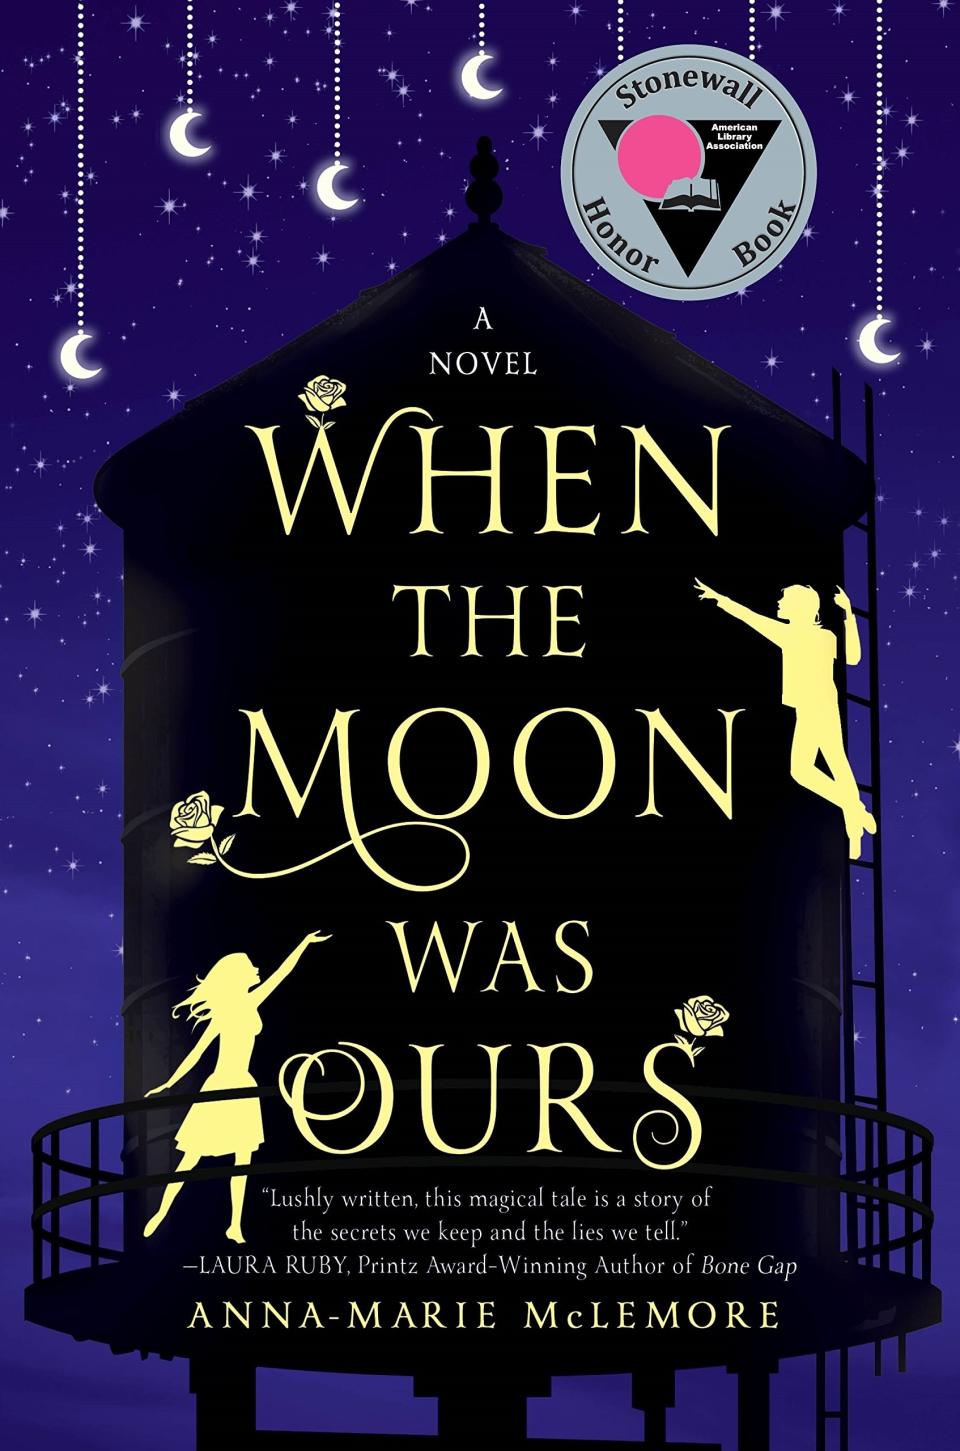 This romantic, magical tale will break your heart and heal it again one page at a time. McLemore's fantastical novel follows Sam and Miel, best friends since childhood who fight to love each other and in turn love themselves. This book tackles body image, self-acceptance, and love all at once.